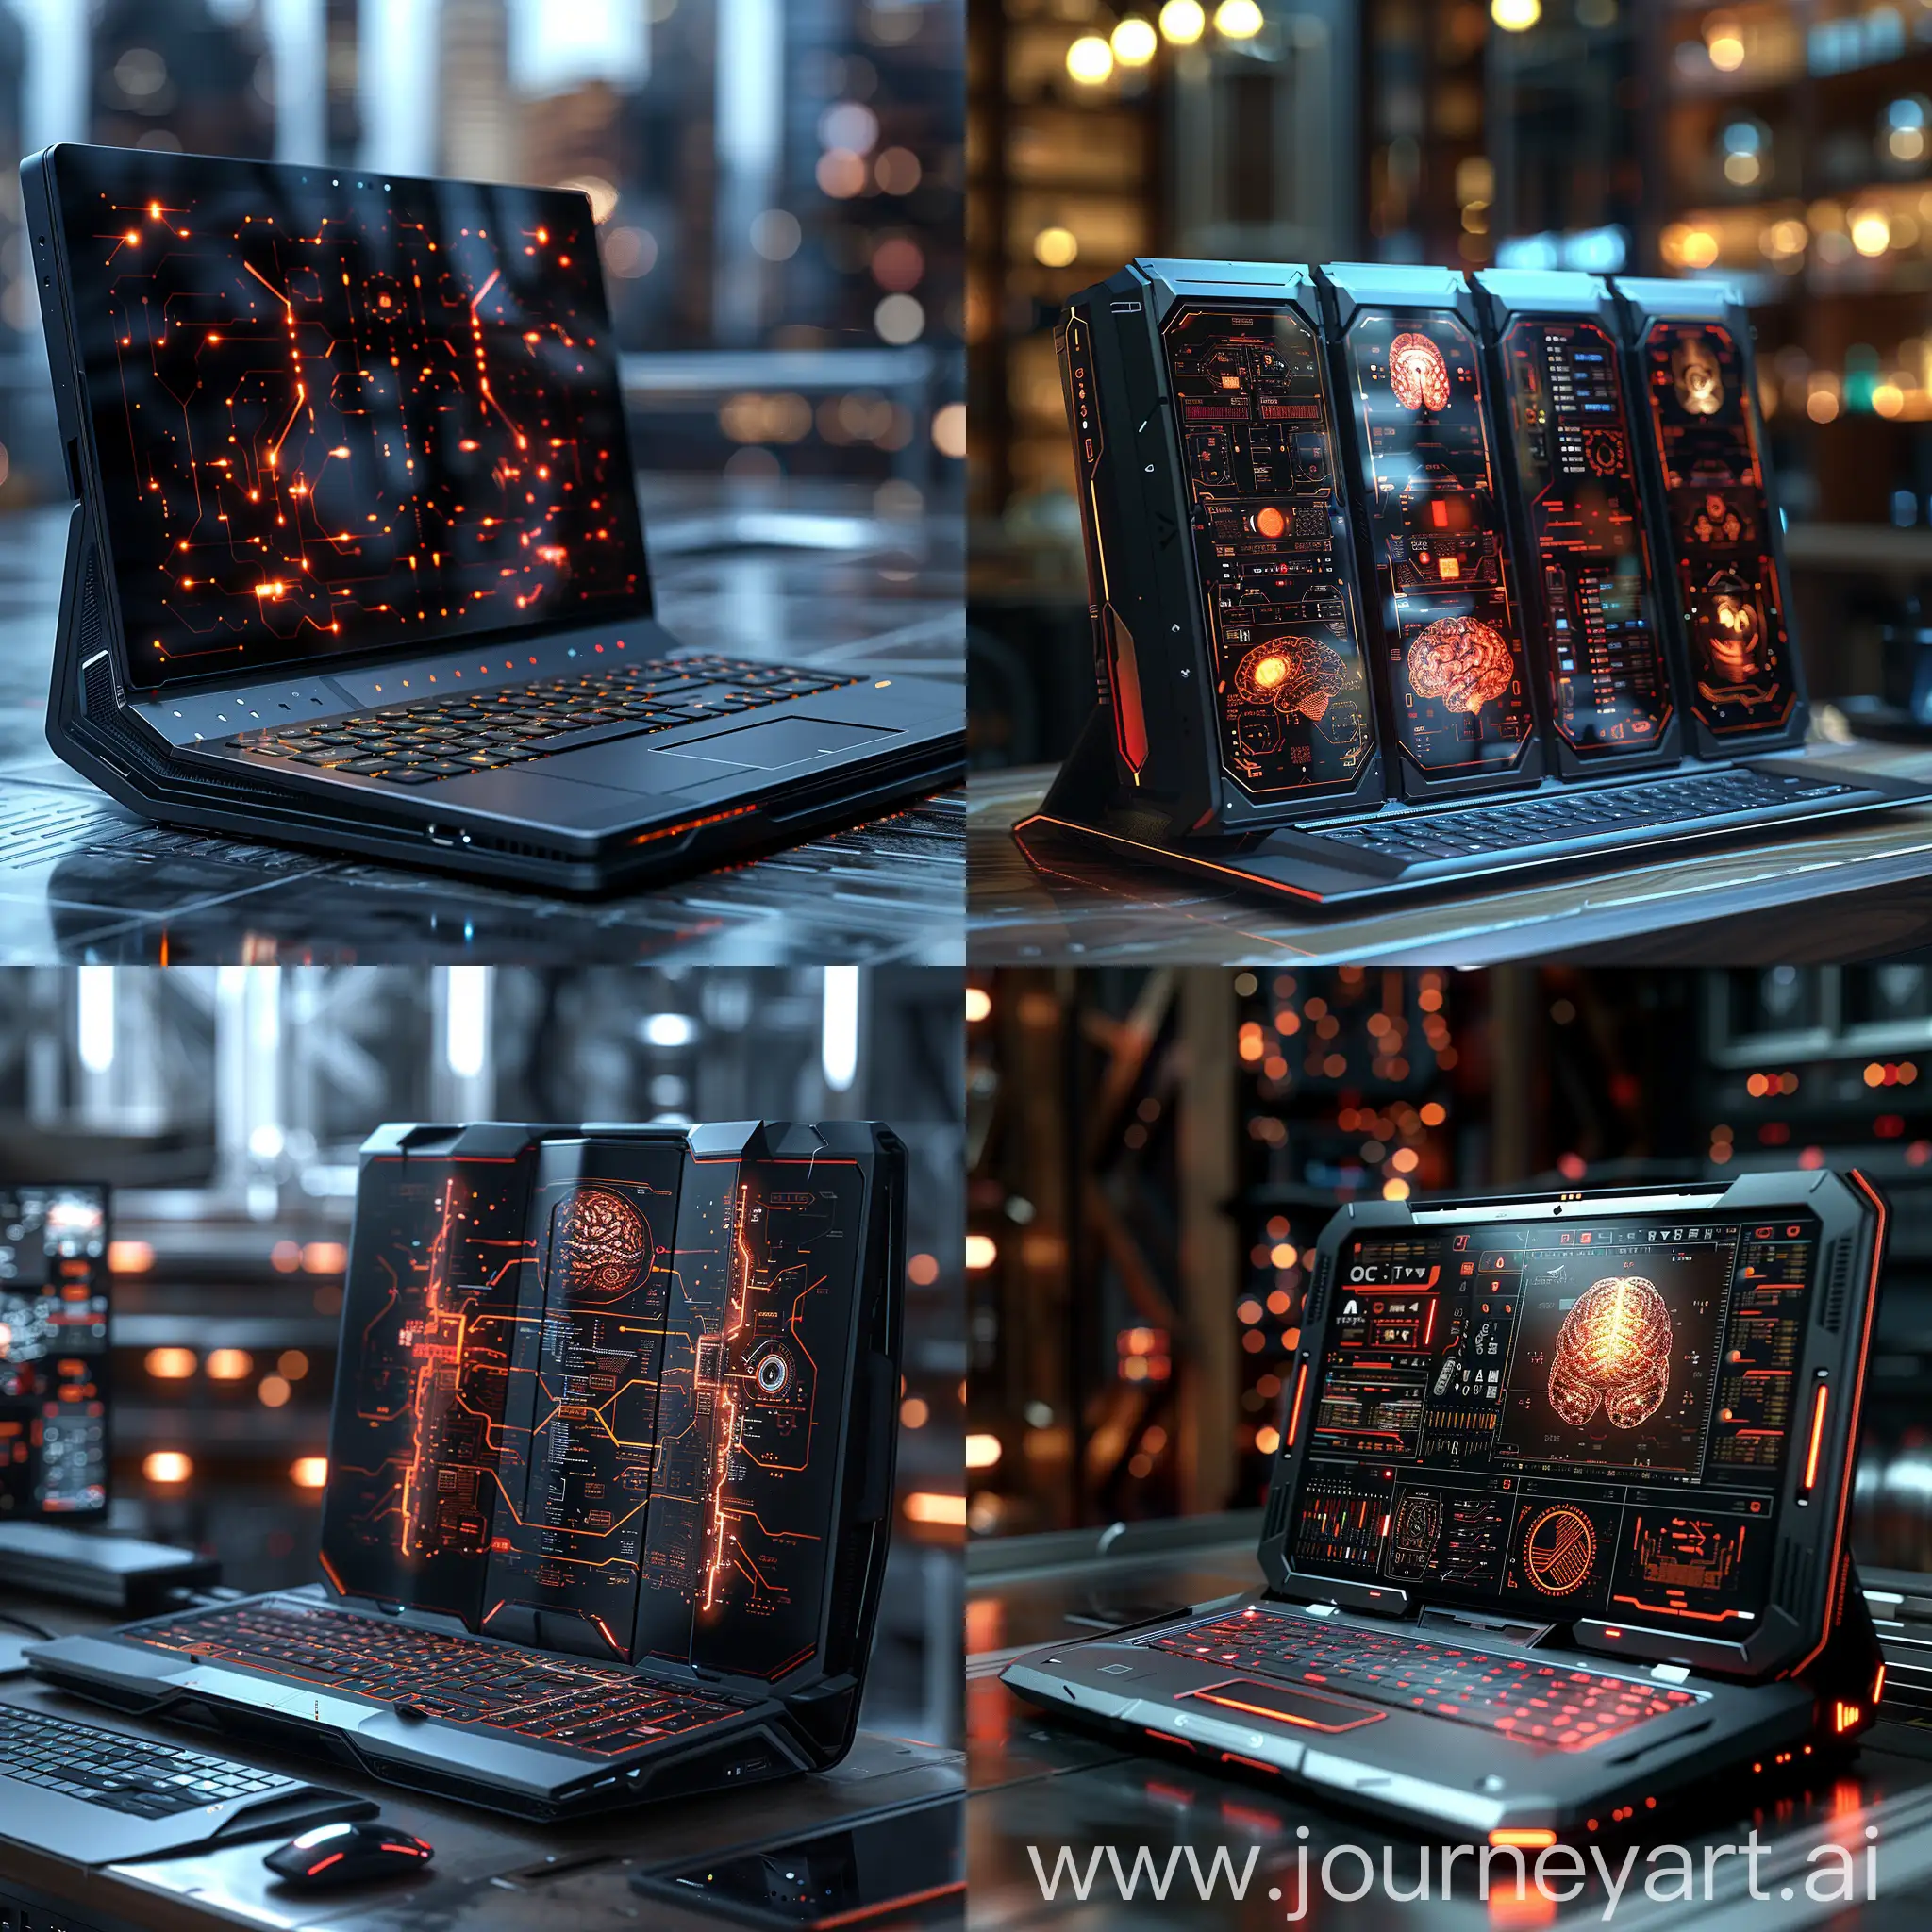 Futuristic-Foldable-Laptop-with-BCI-Integration-and-AR-Overlay